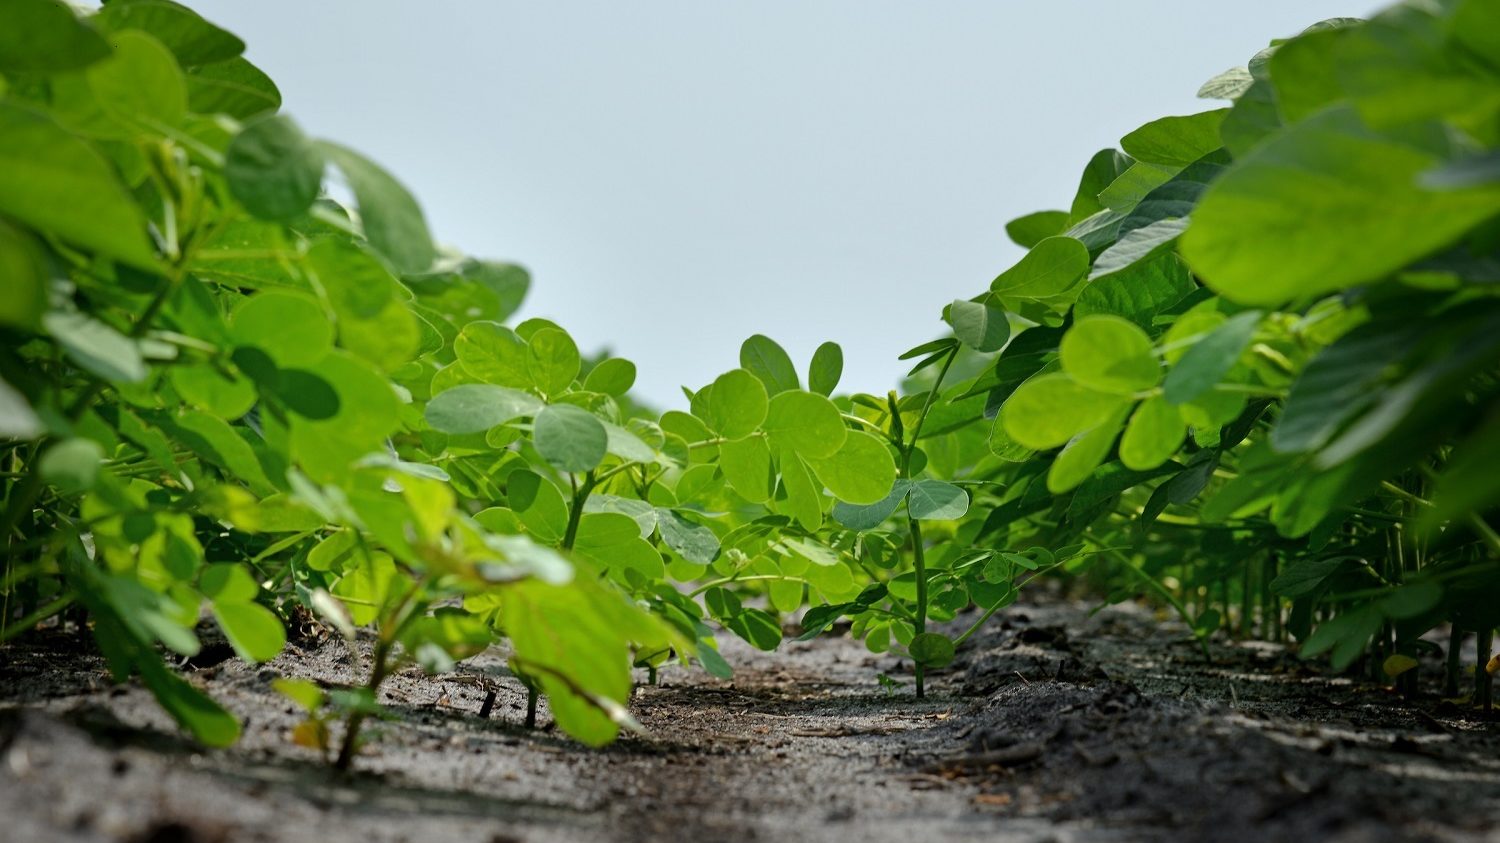 Soybeans at the early stage of growth in Hofmann Forest. Photo by Roger W Winstead